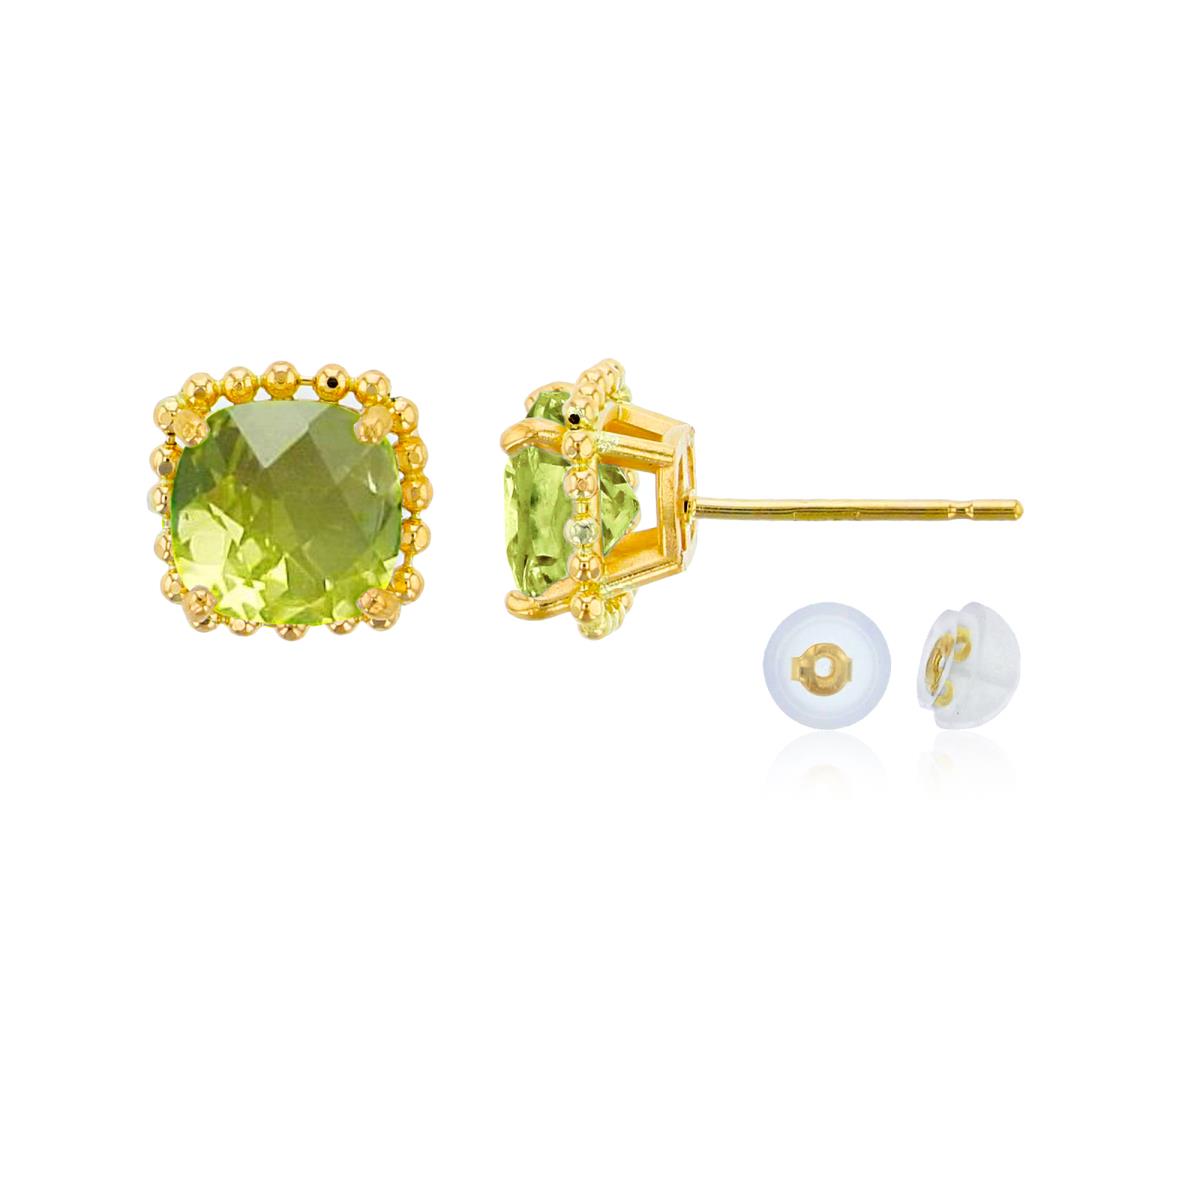 10K Yellow Gold 6x6mm Cushion Cut Apple Quartz Bead Frame Stud Earring with Silicone Back